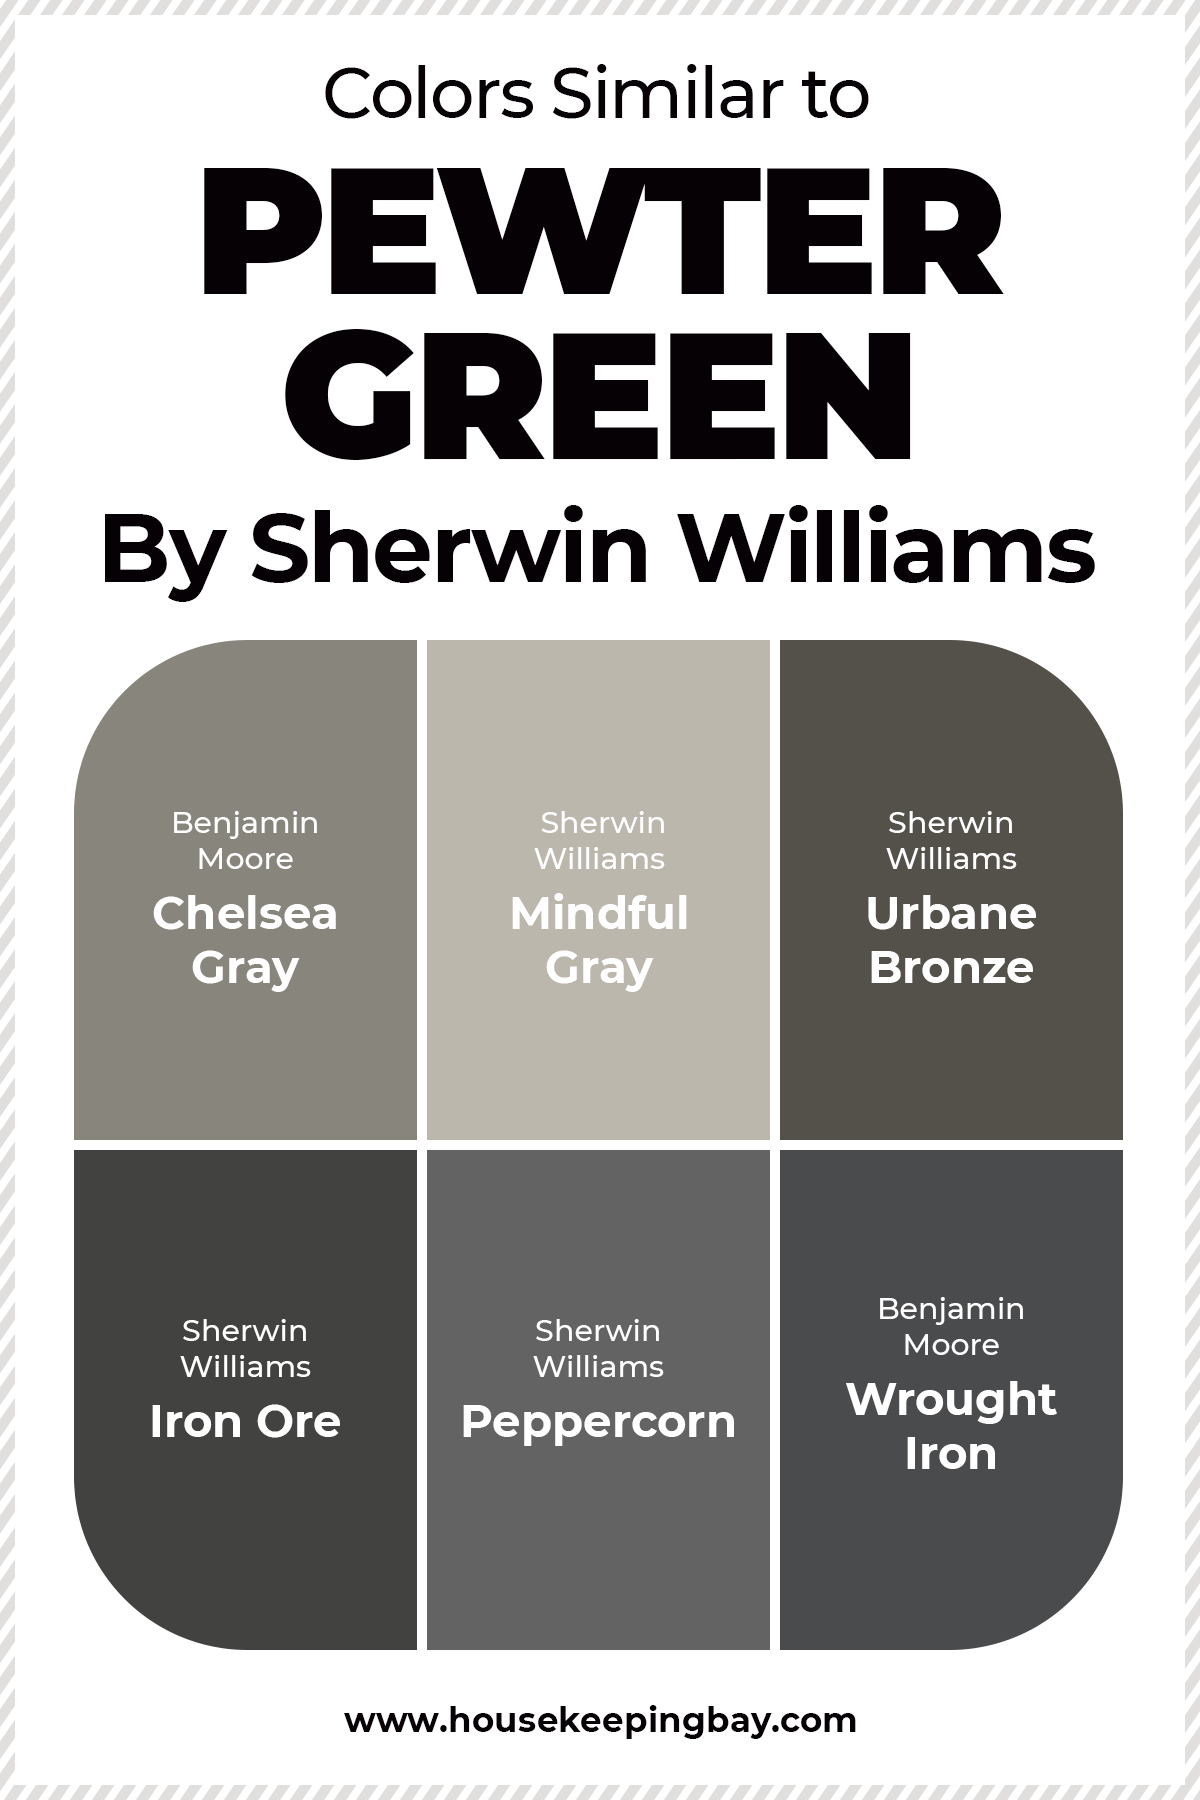 Colors Similar to Pewter Green by Sherwin Williams